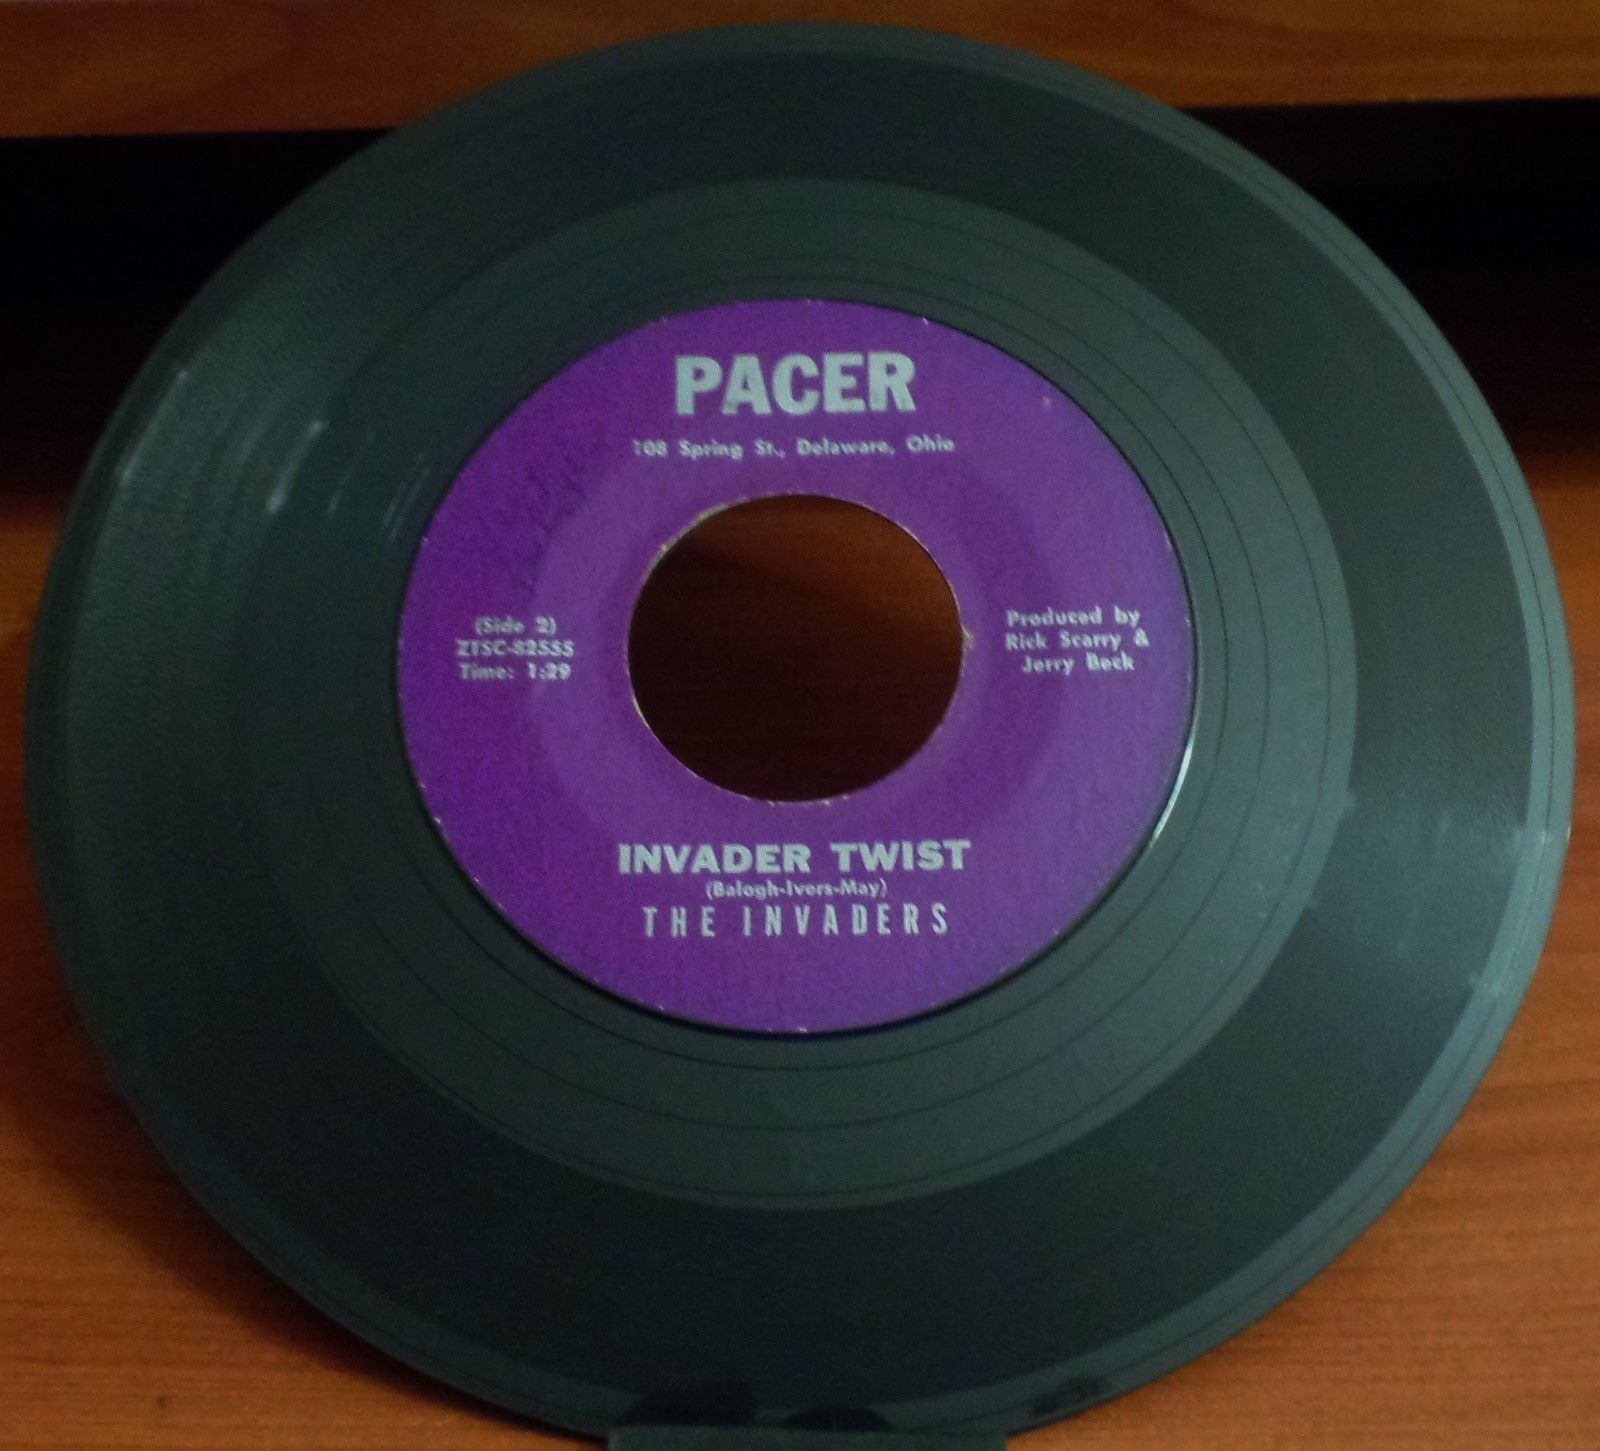 Rare Ohio rockabilly/Surf The Invaders on Pacer "Invader Twist"  Hear